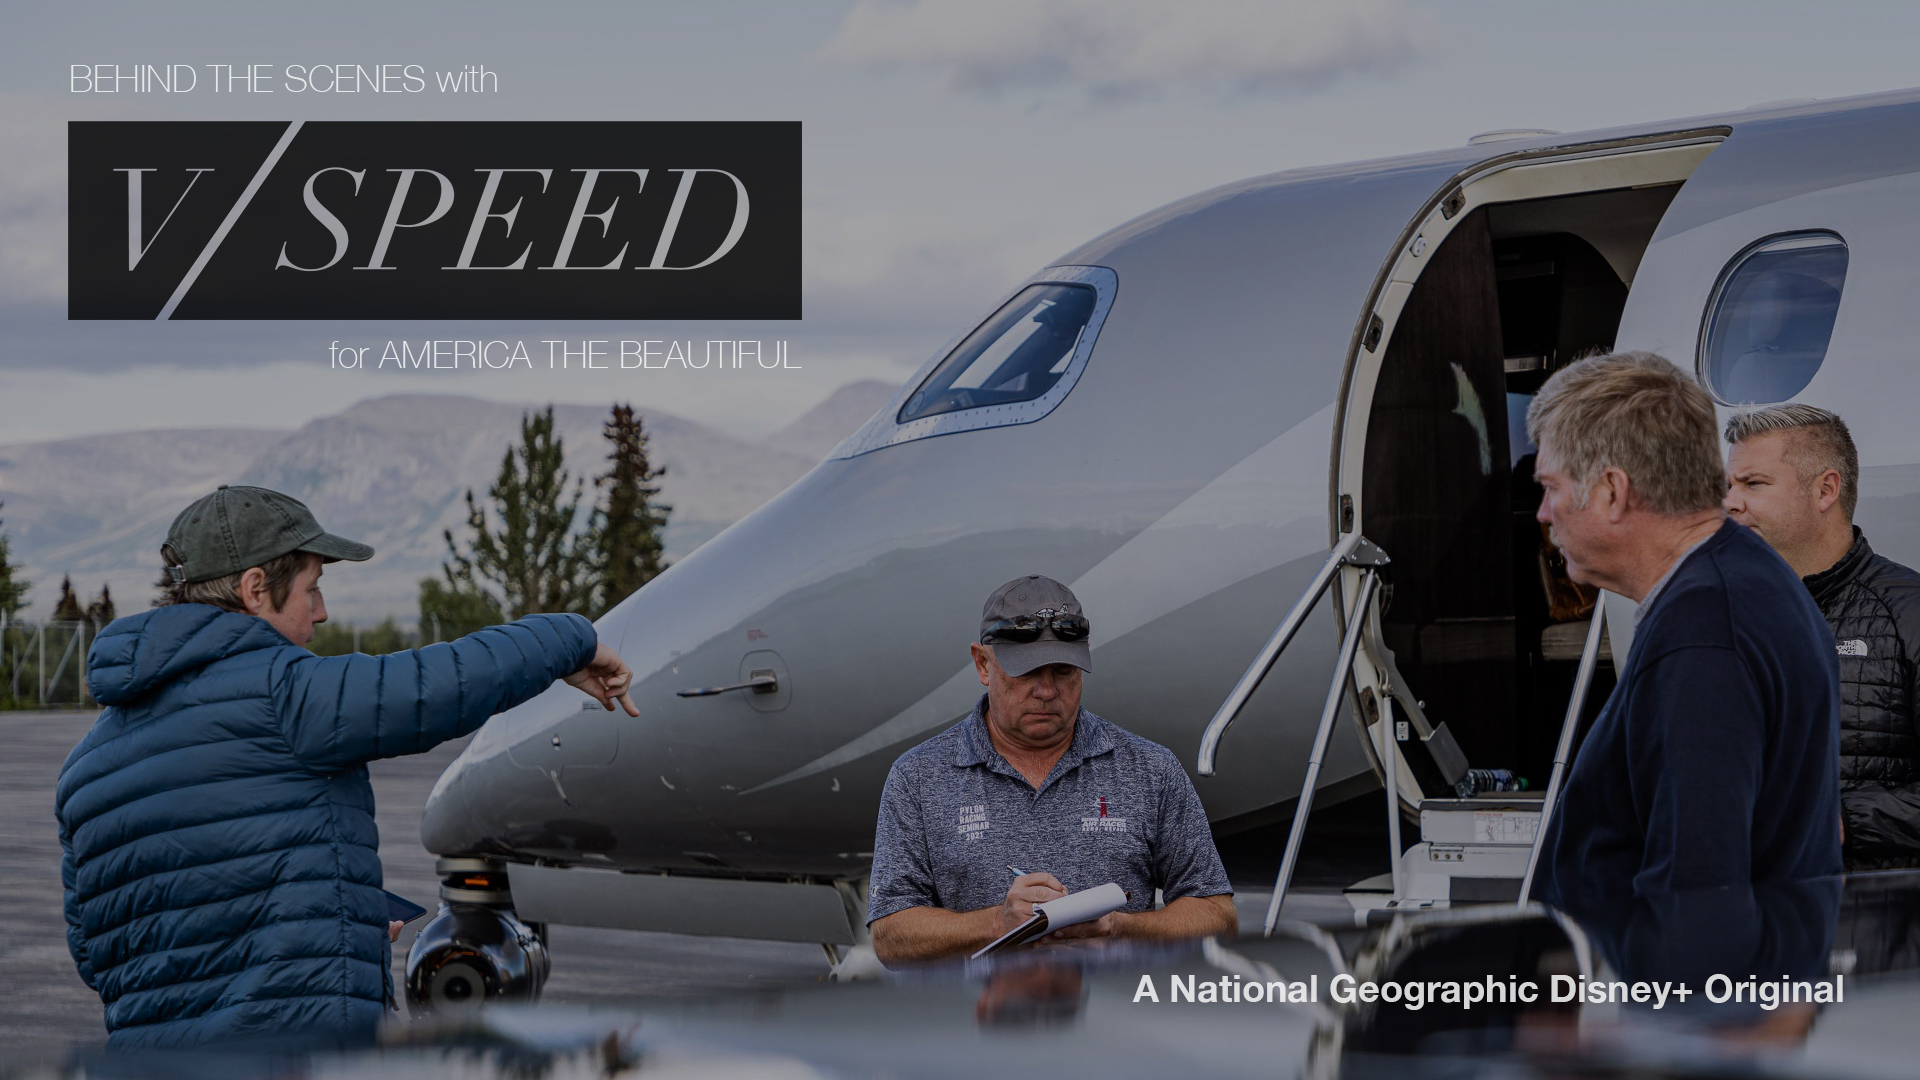 Behind the Scenes in Alaska with V/Speed and National Geographic